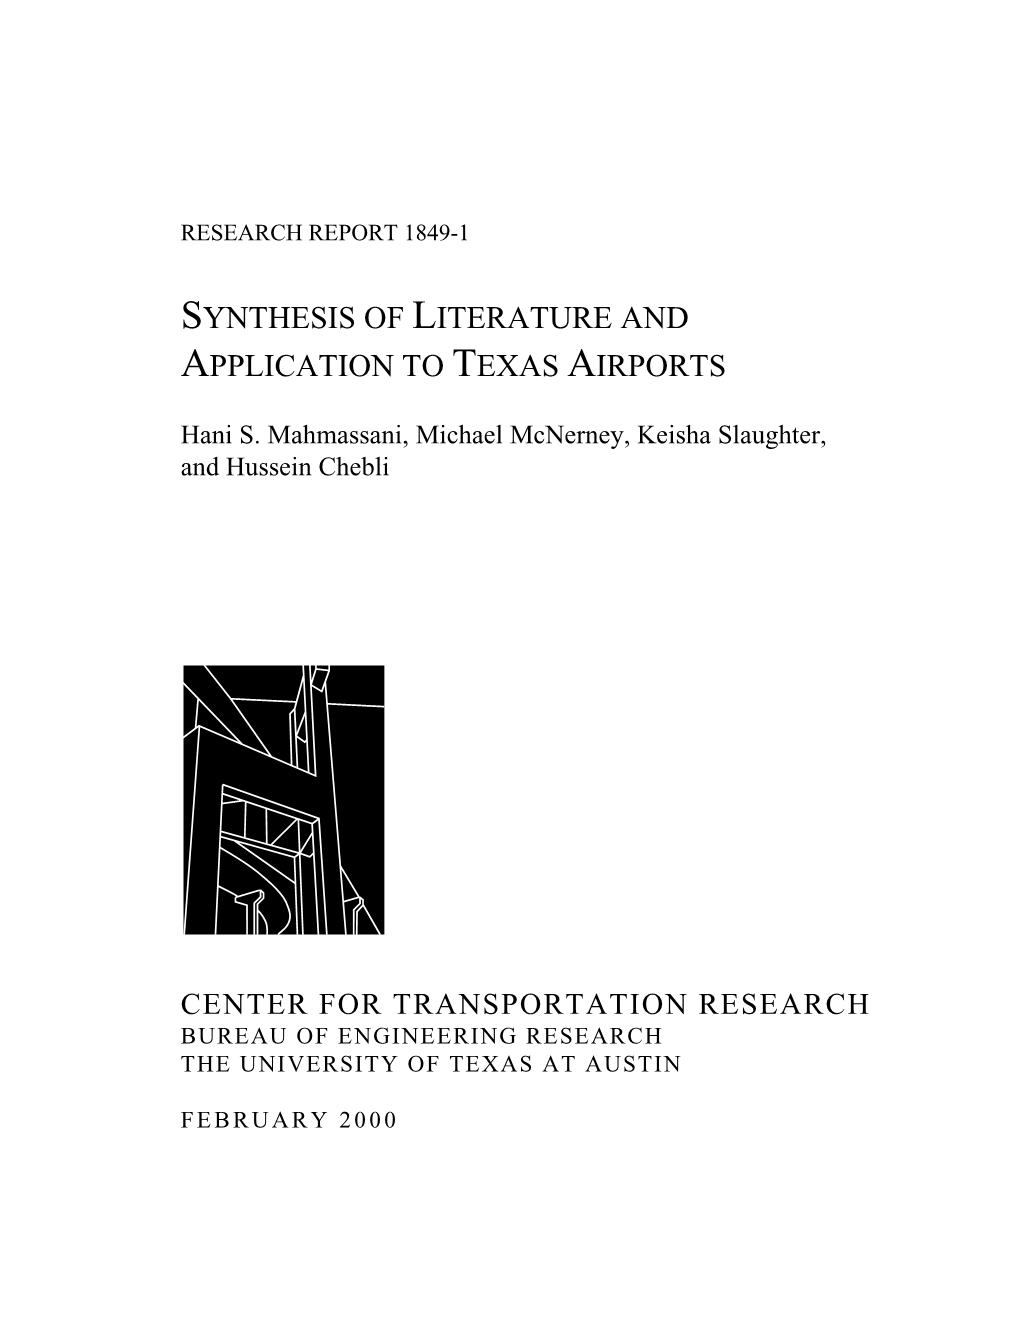 Synthesis of Literature and Application to Texas Airports (FHWA/TX-00/1849-1)